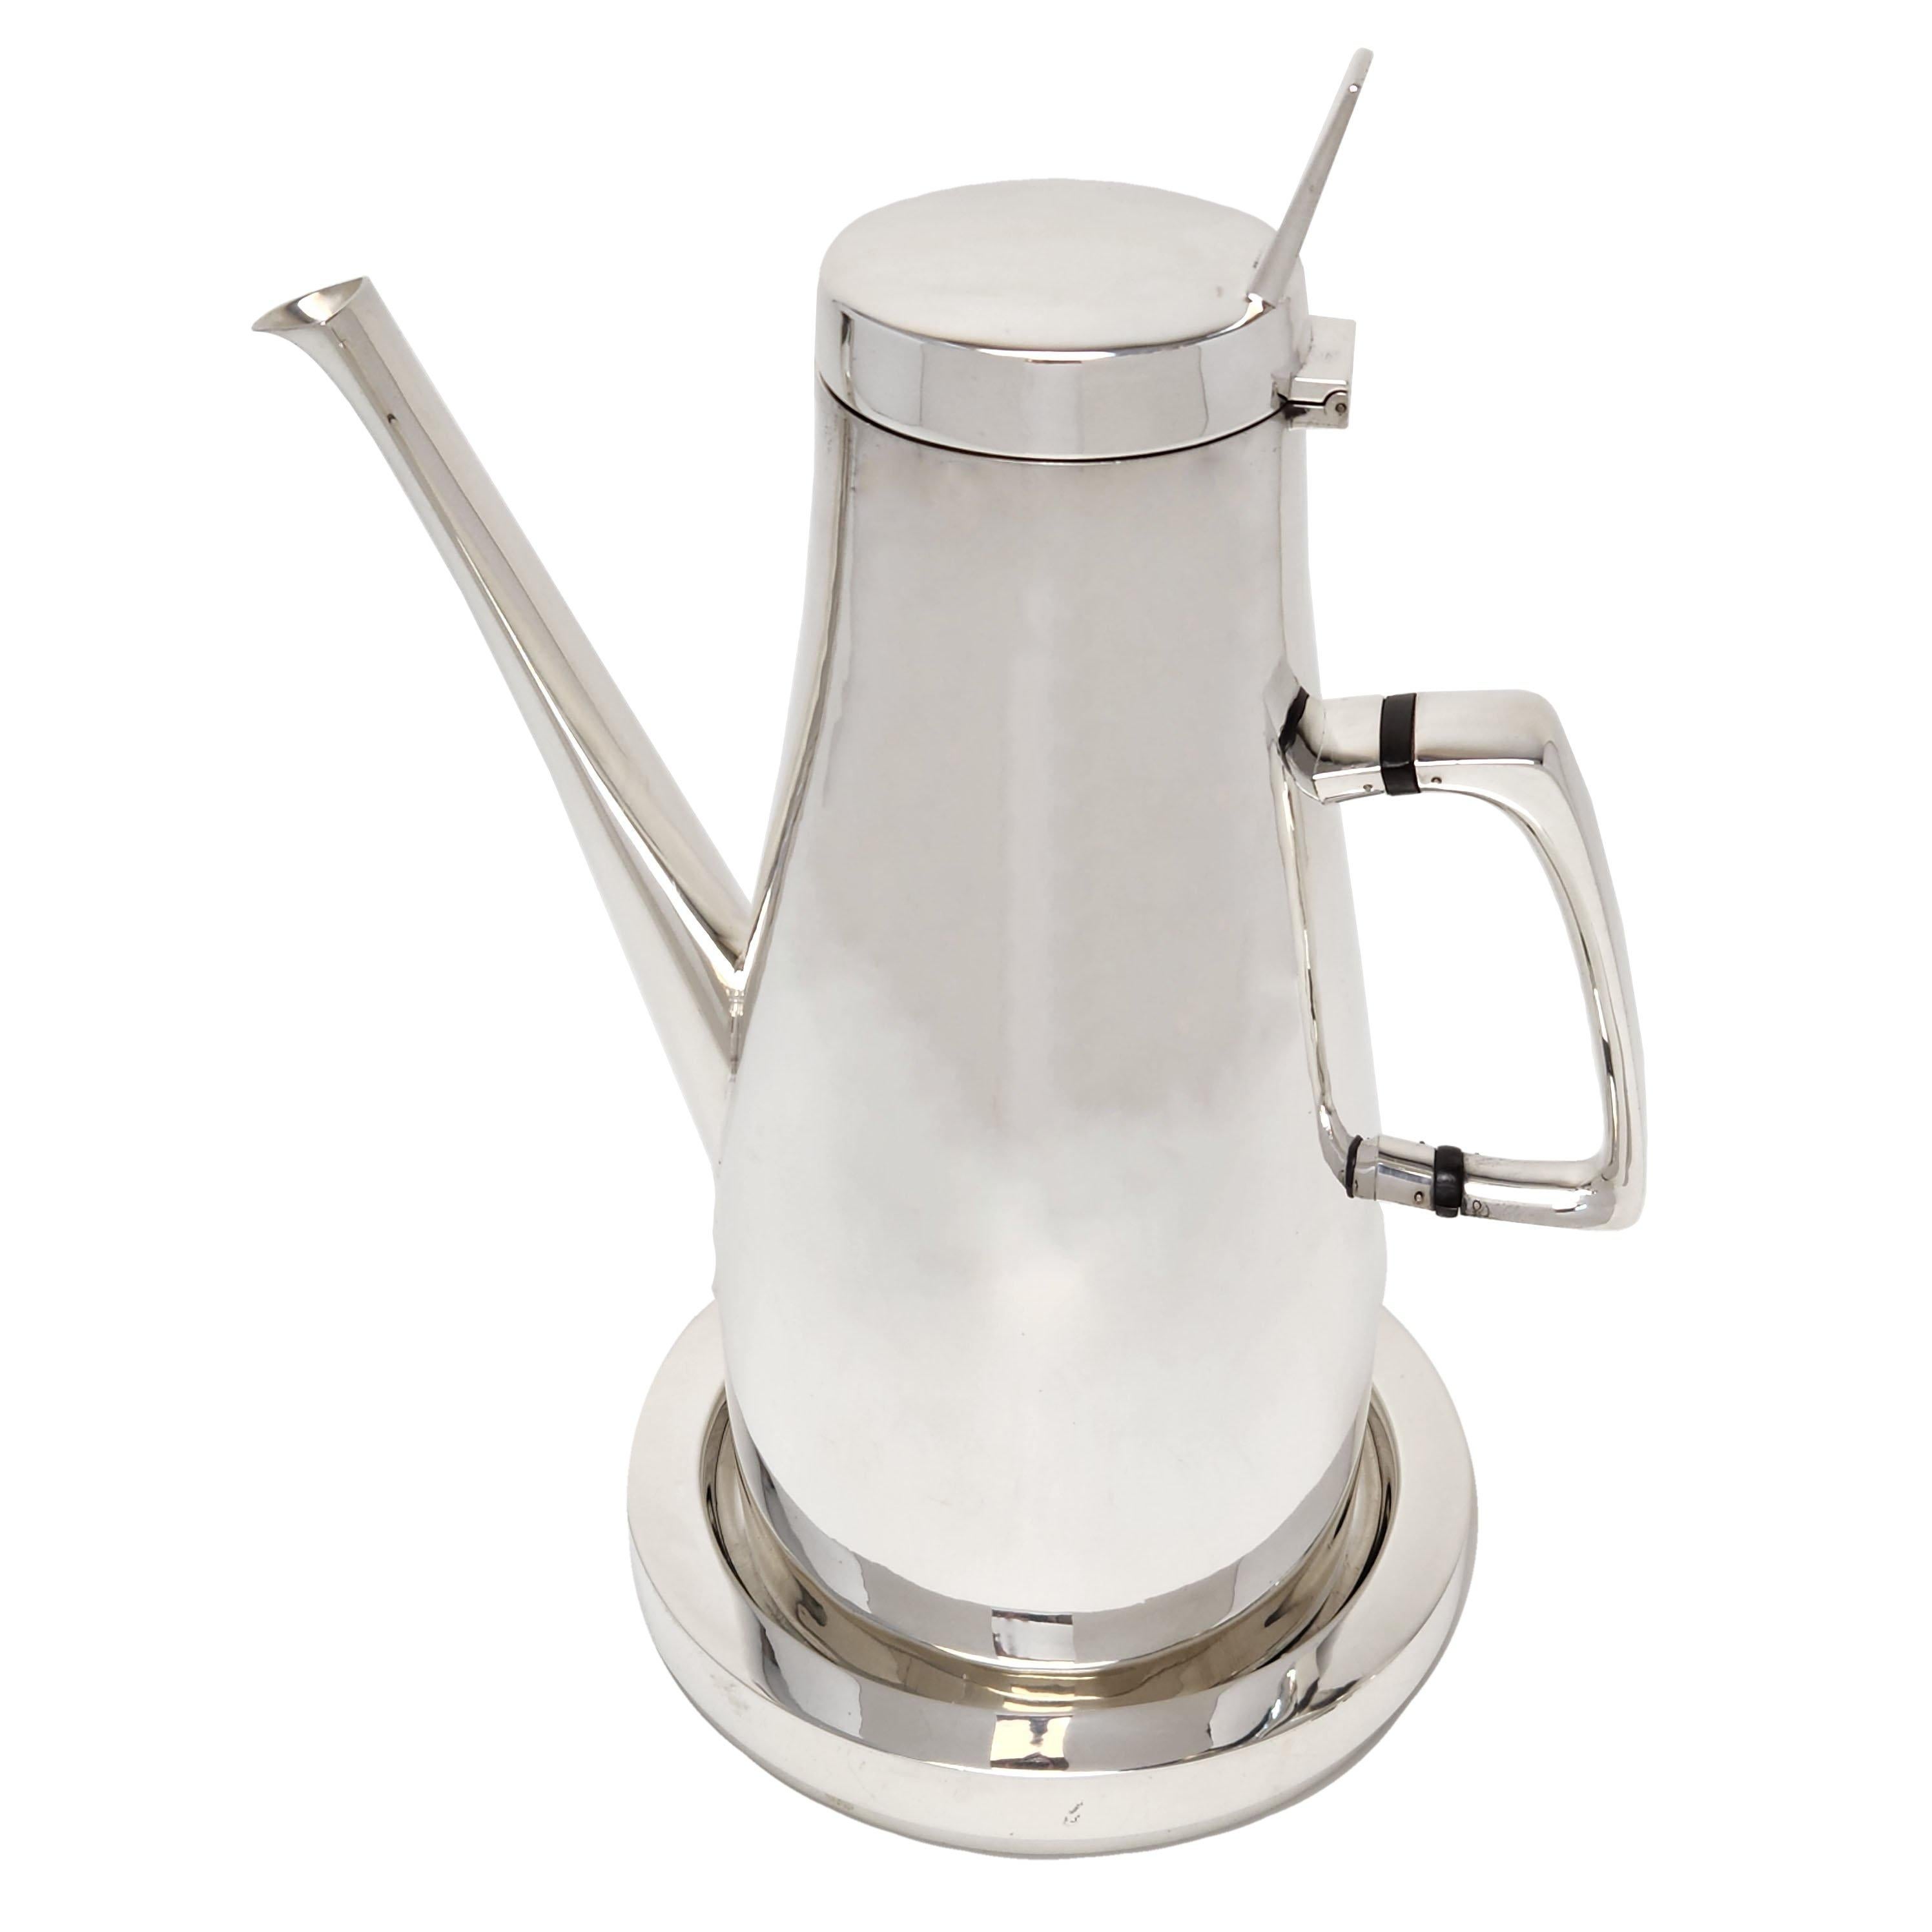 An impressive sterling silver coffee pot made by Gerald Benney. This magnificent Coffee Post if of a large size and has an elegant polished form. It rests on a round Silver Stand. 

Made in London, England in 1965 by Gerald Benney.

Approx.